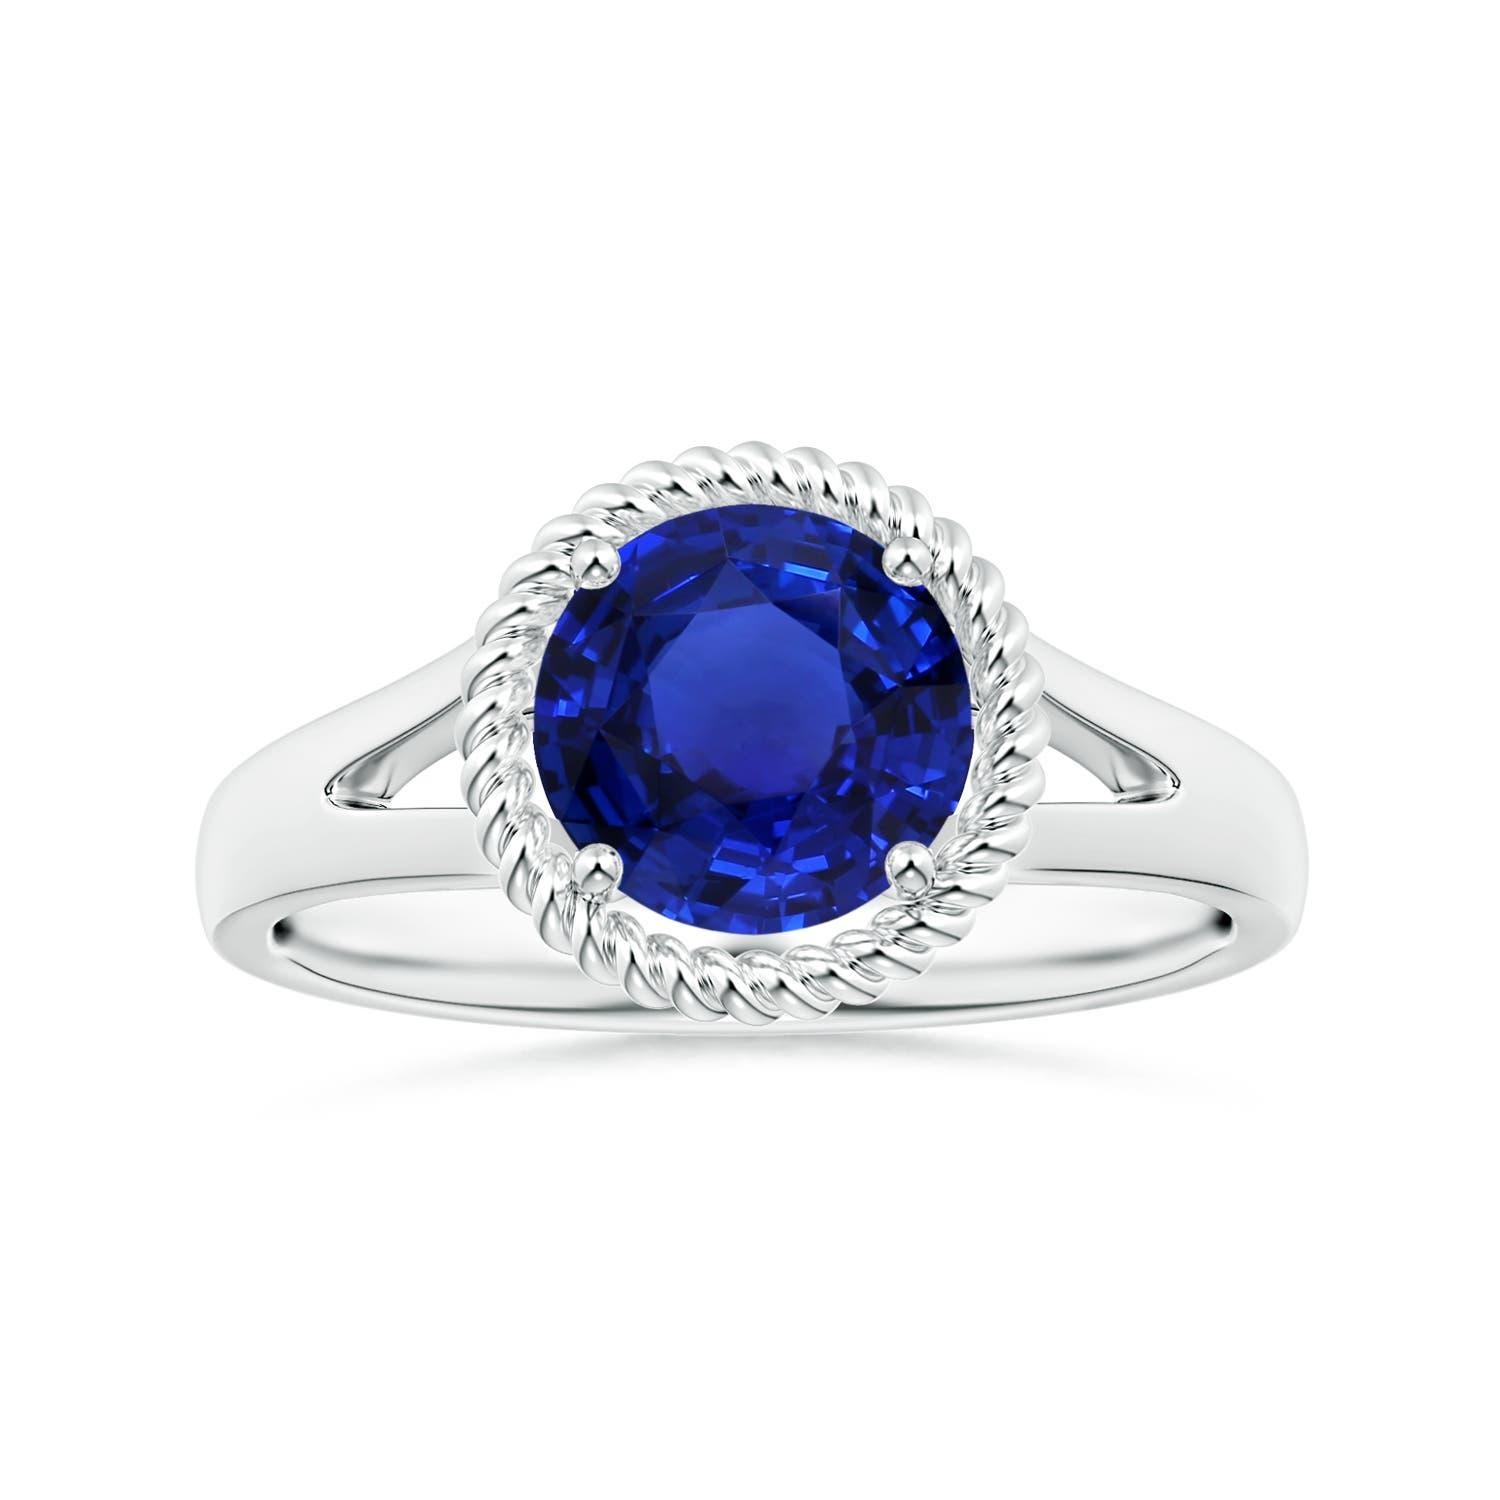 For Sale:  ANGARA GIA Certified Natural Blue Sapphire Halo Ring in White Gold